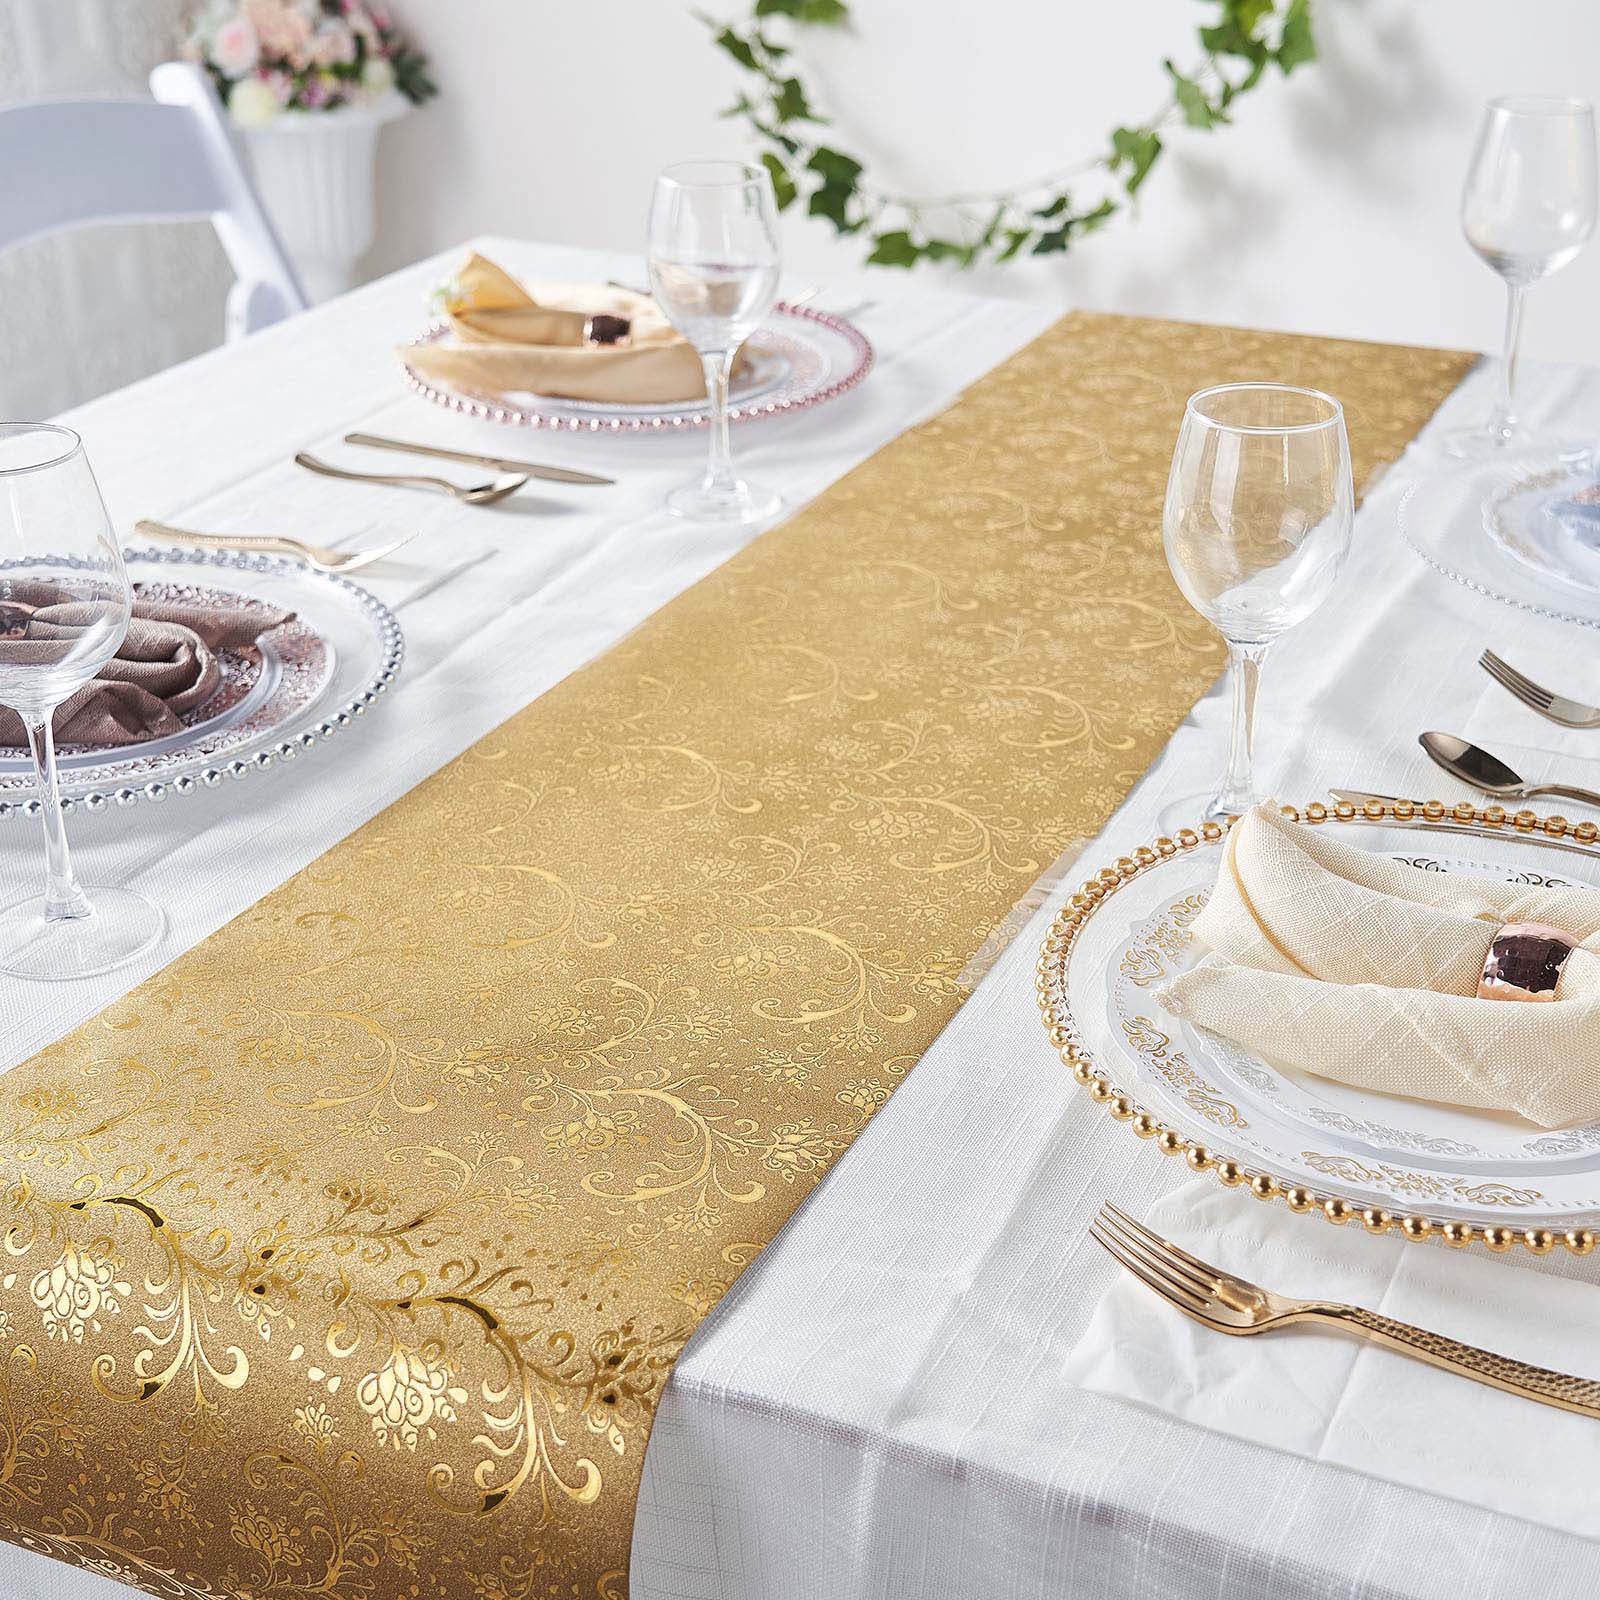 Efavormart 9Ft Glitter Paper Table Runner Roll, Disposable Table Runner  with Vintage Floral Design - Gold for Morden Stylish Wedding Party Holiday